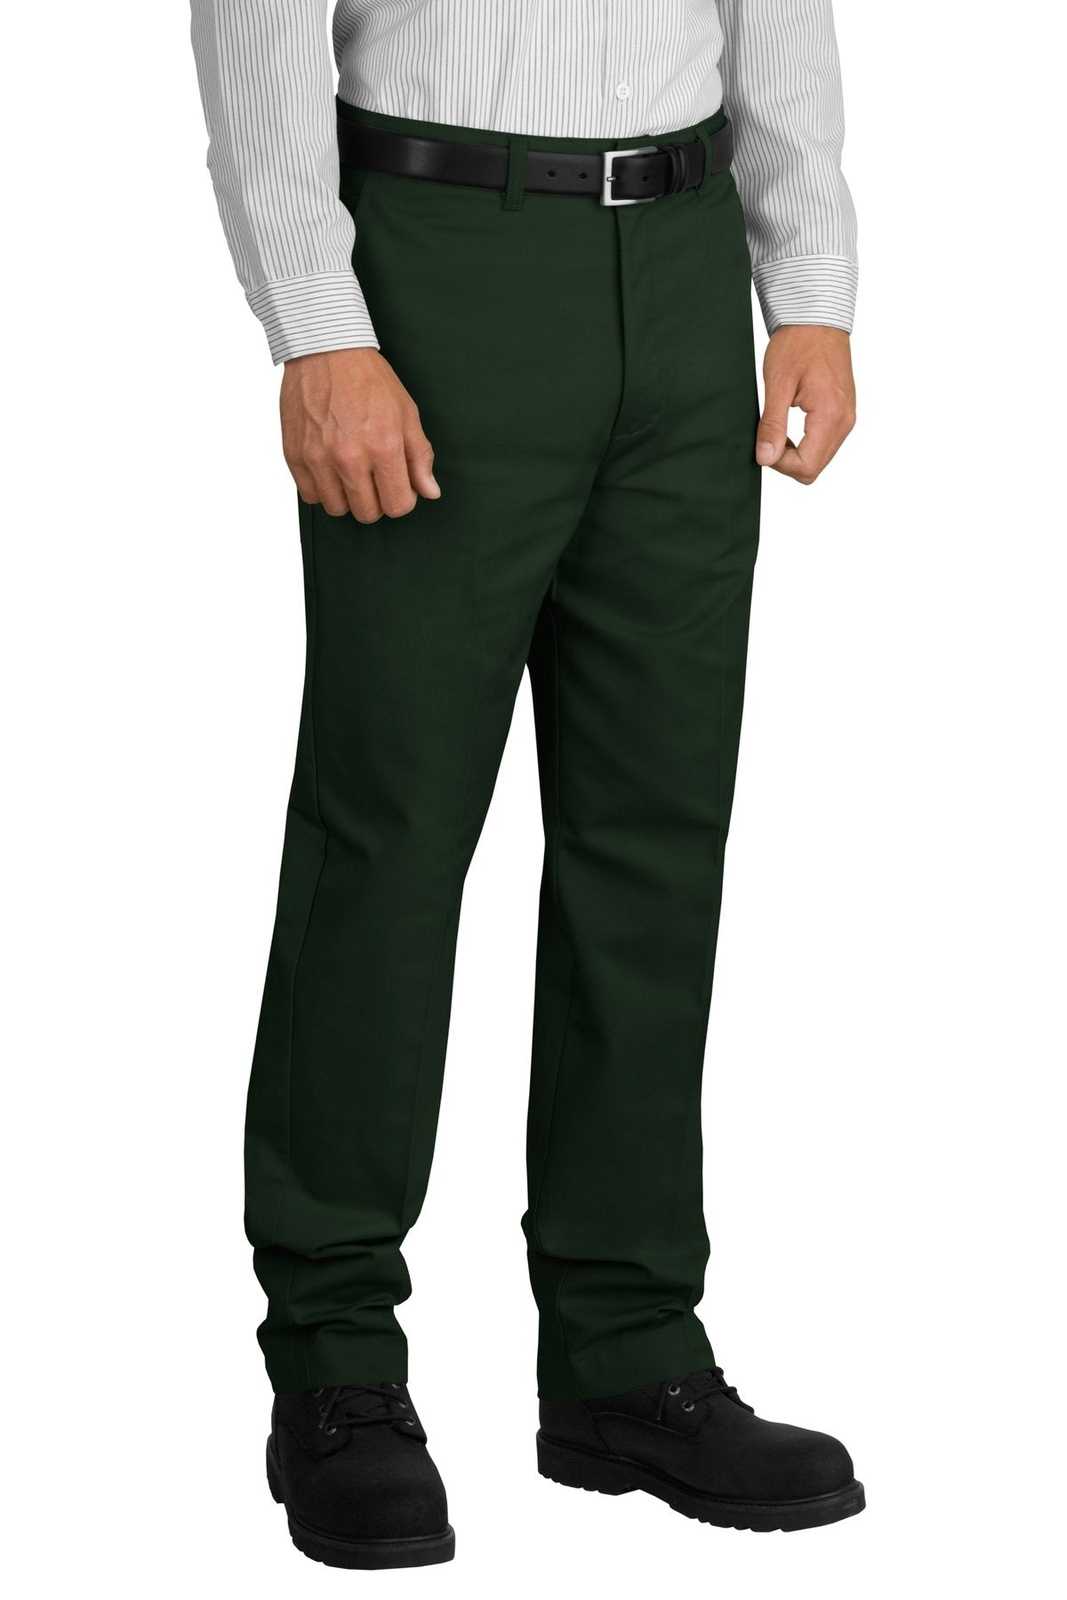 Red Kap PT20 Industrial Work Pant - Spruce Green - HIT a Double - 1